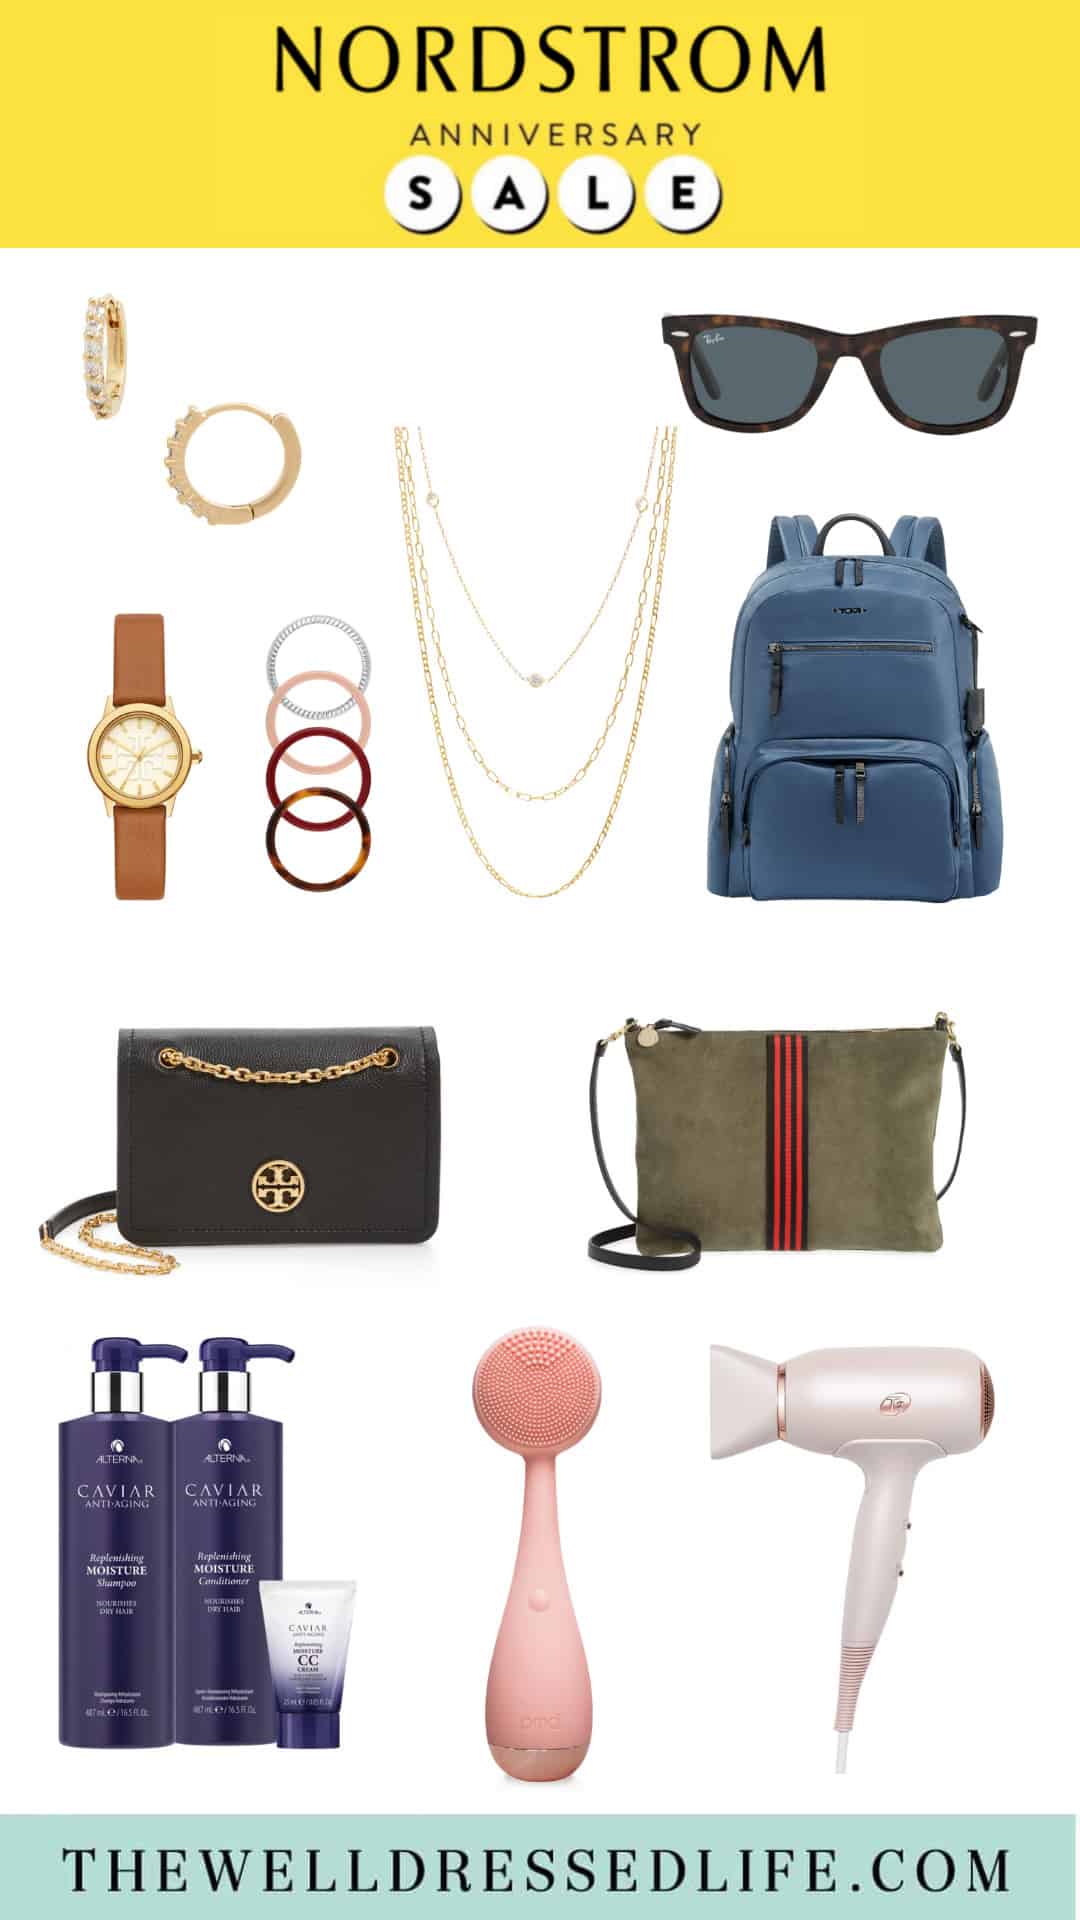 What to Buy at the Nordstrom Sale: Beauty, Bags and Accessories